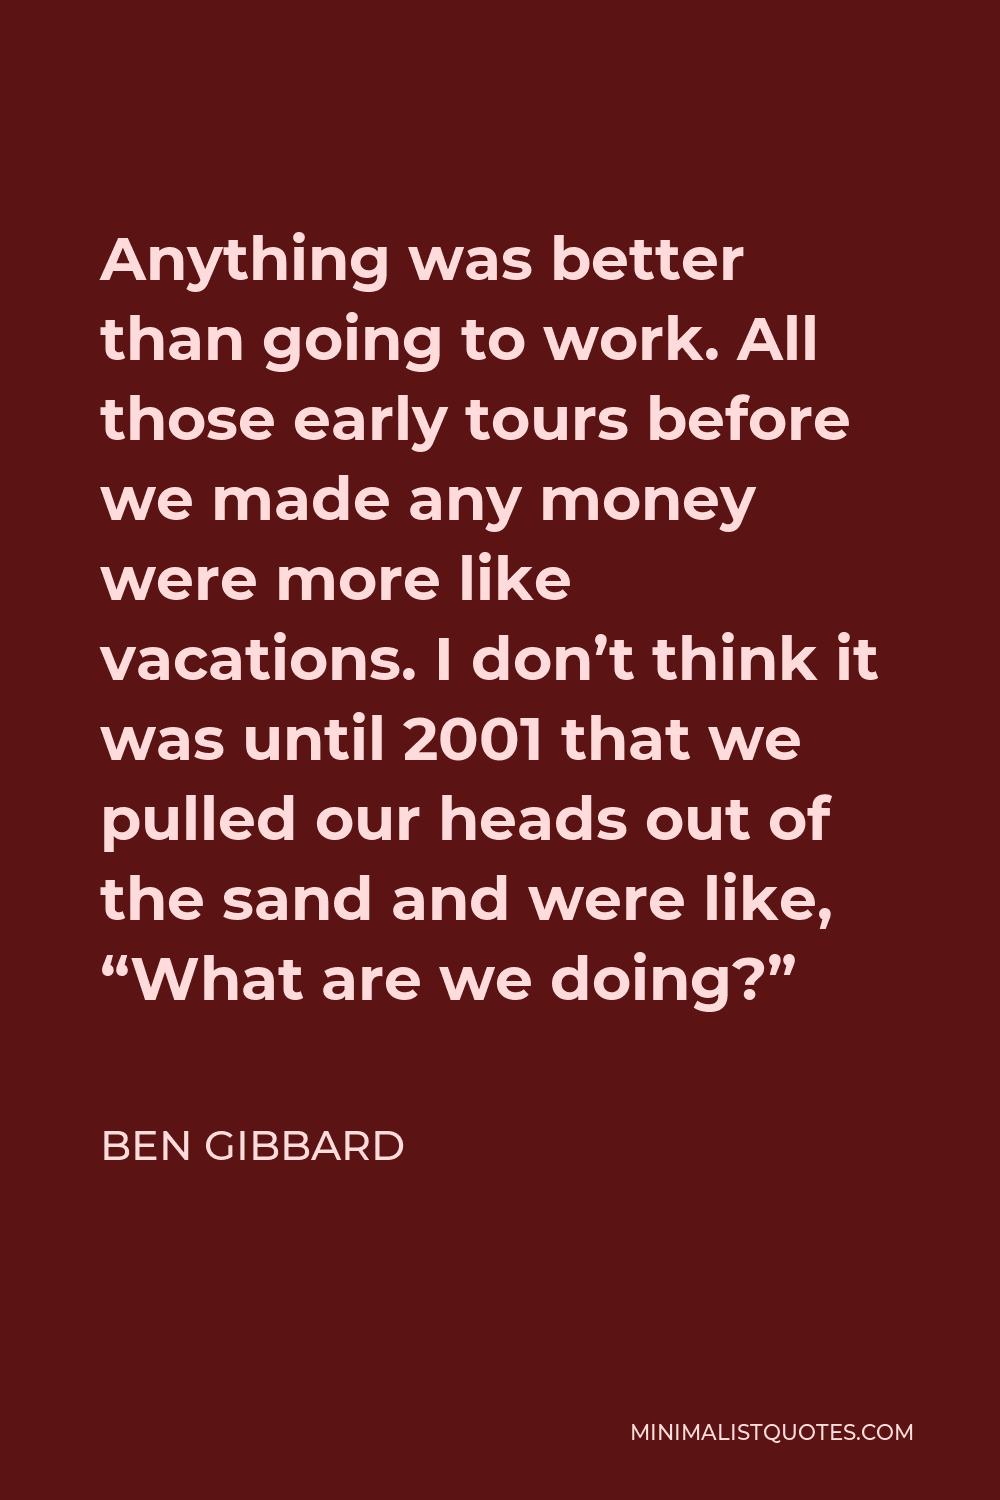 Ben Gibbard Quote - Anything was better than going to work. All those early tours before we made any money were more like vacations. I don’t think it was until 2001 that we pulled our heads out of the sand and were like, “What are we doing?”